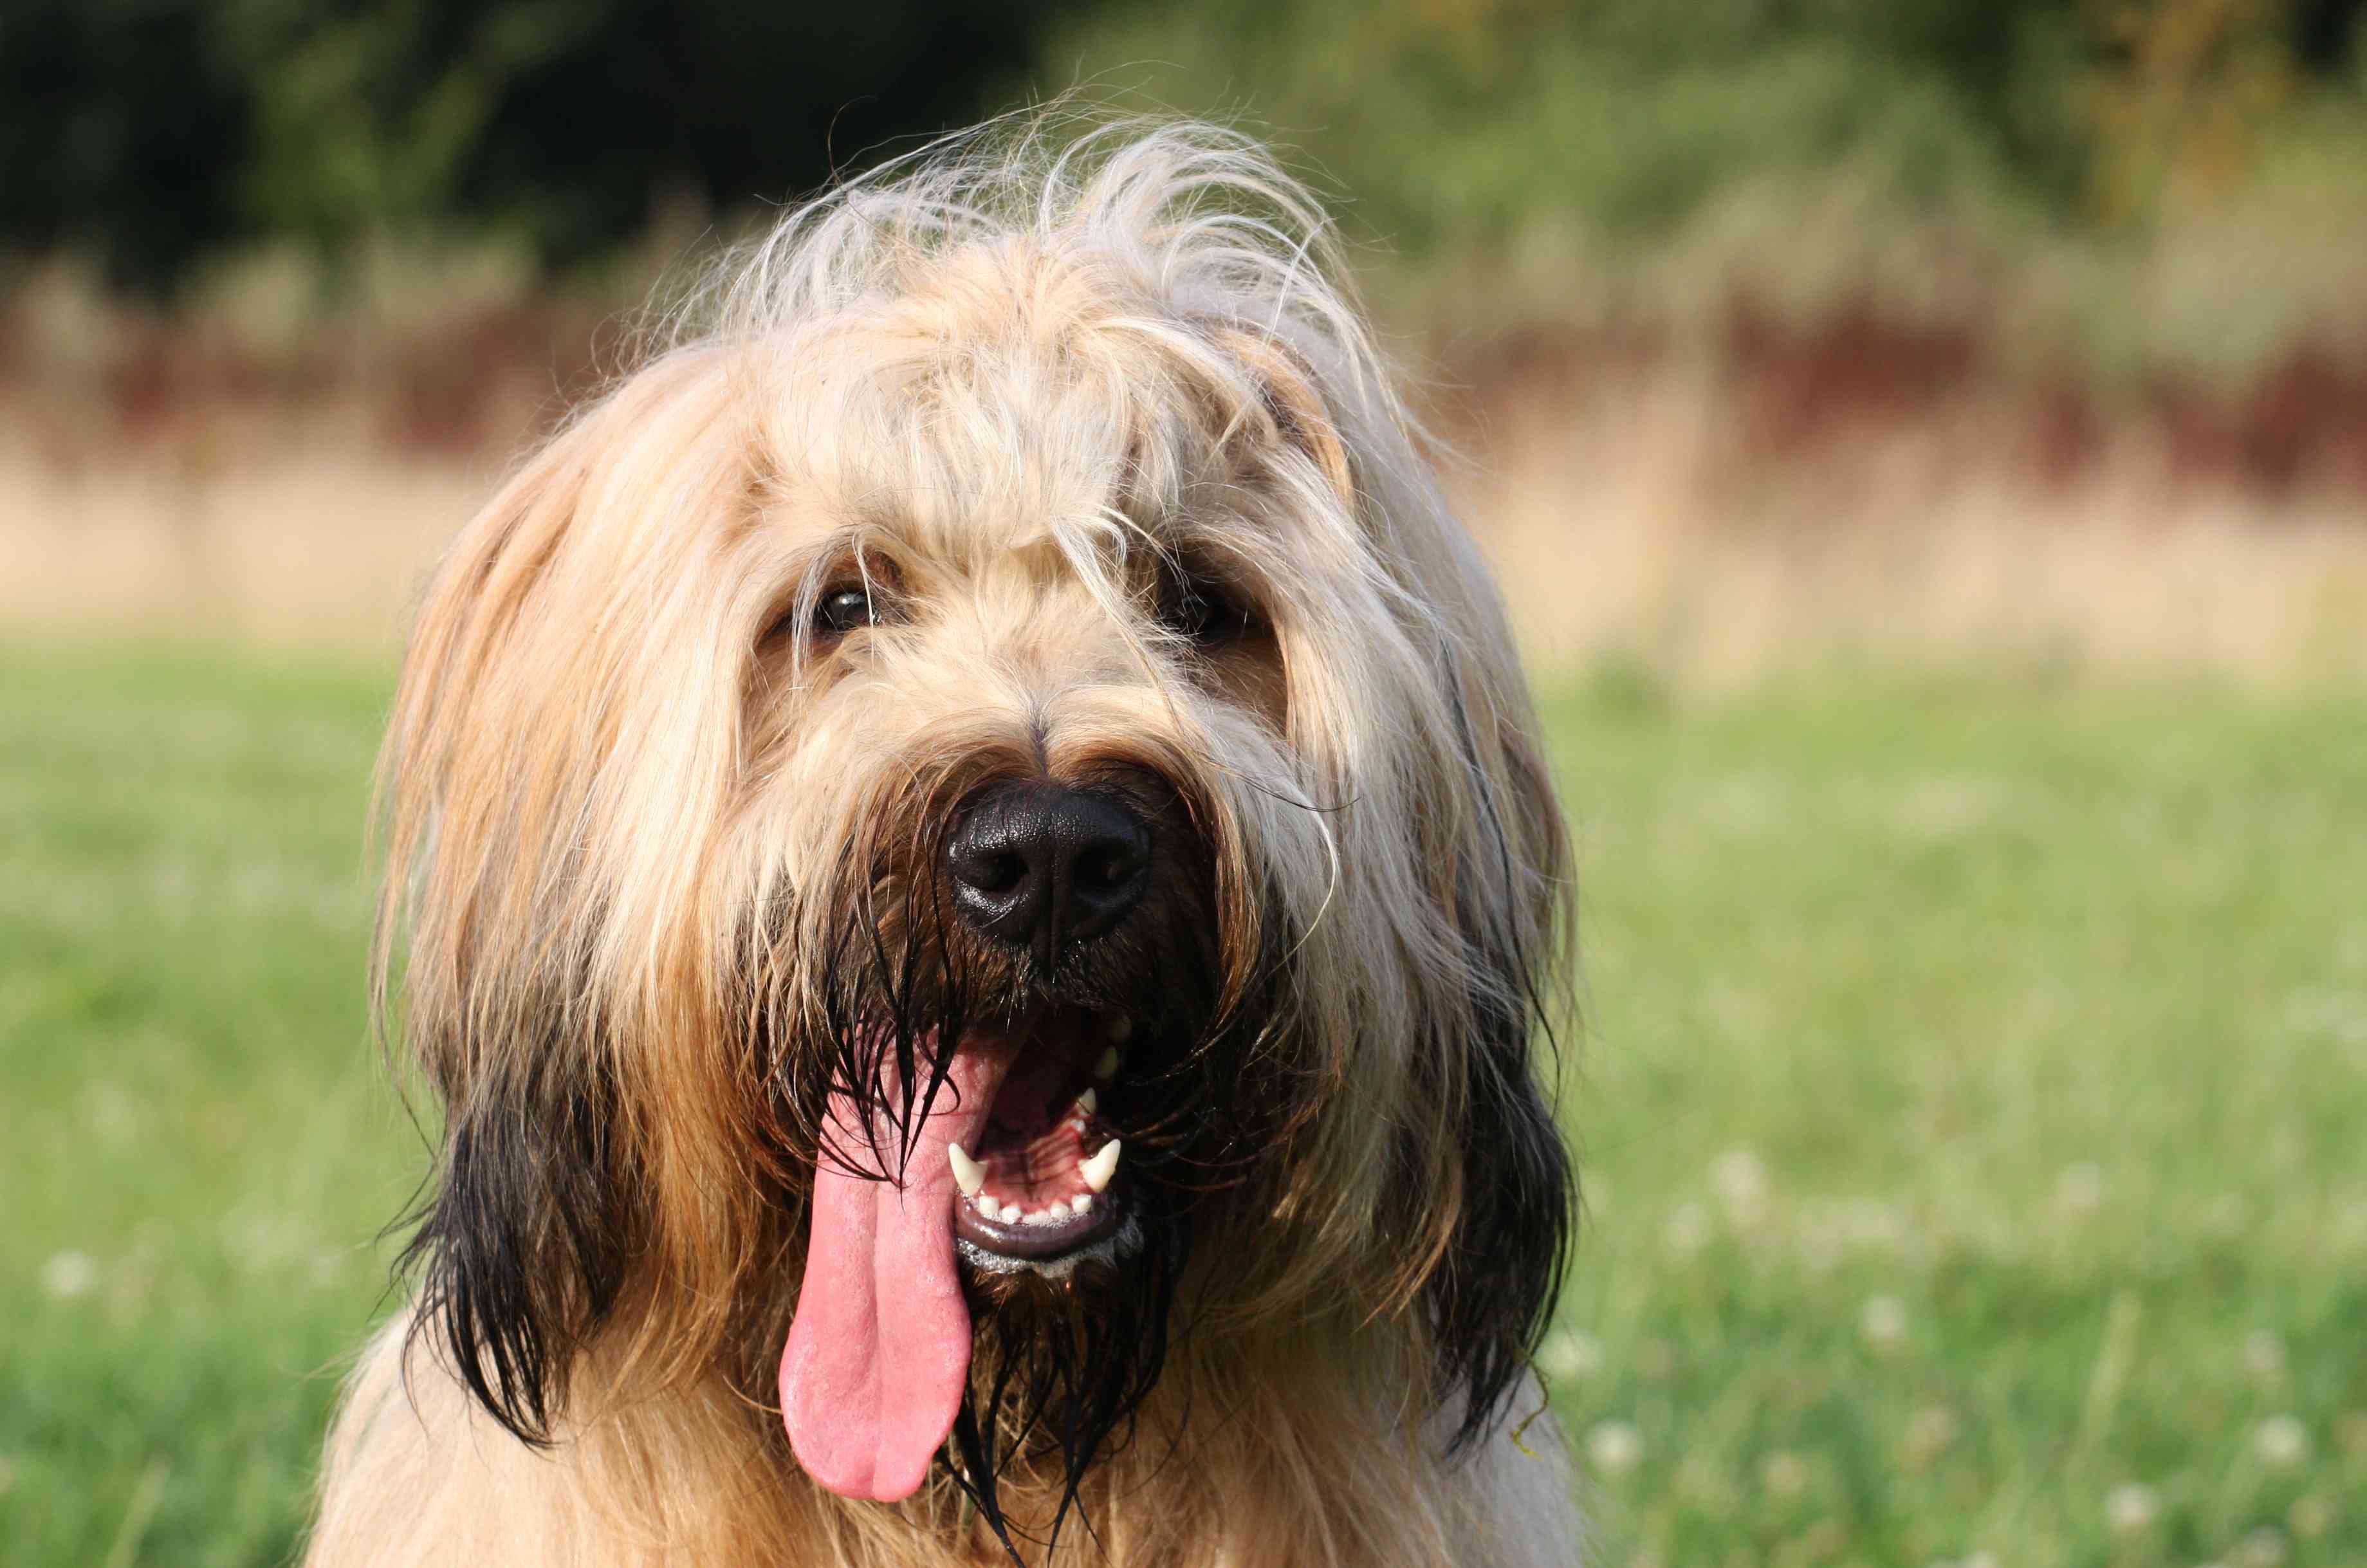 Briard headshot with tongue hanging out on blurred field background